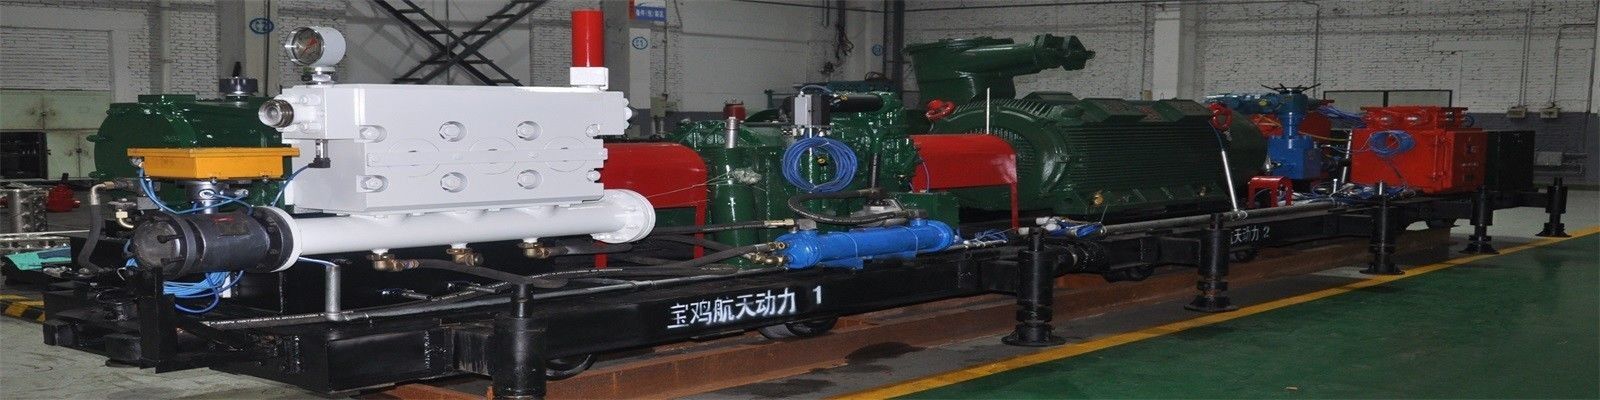 Water Injection Pump